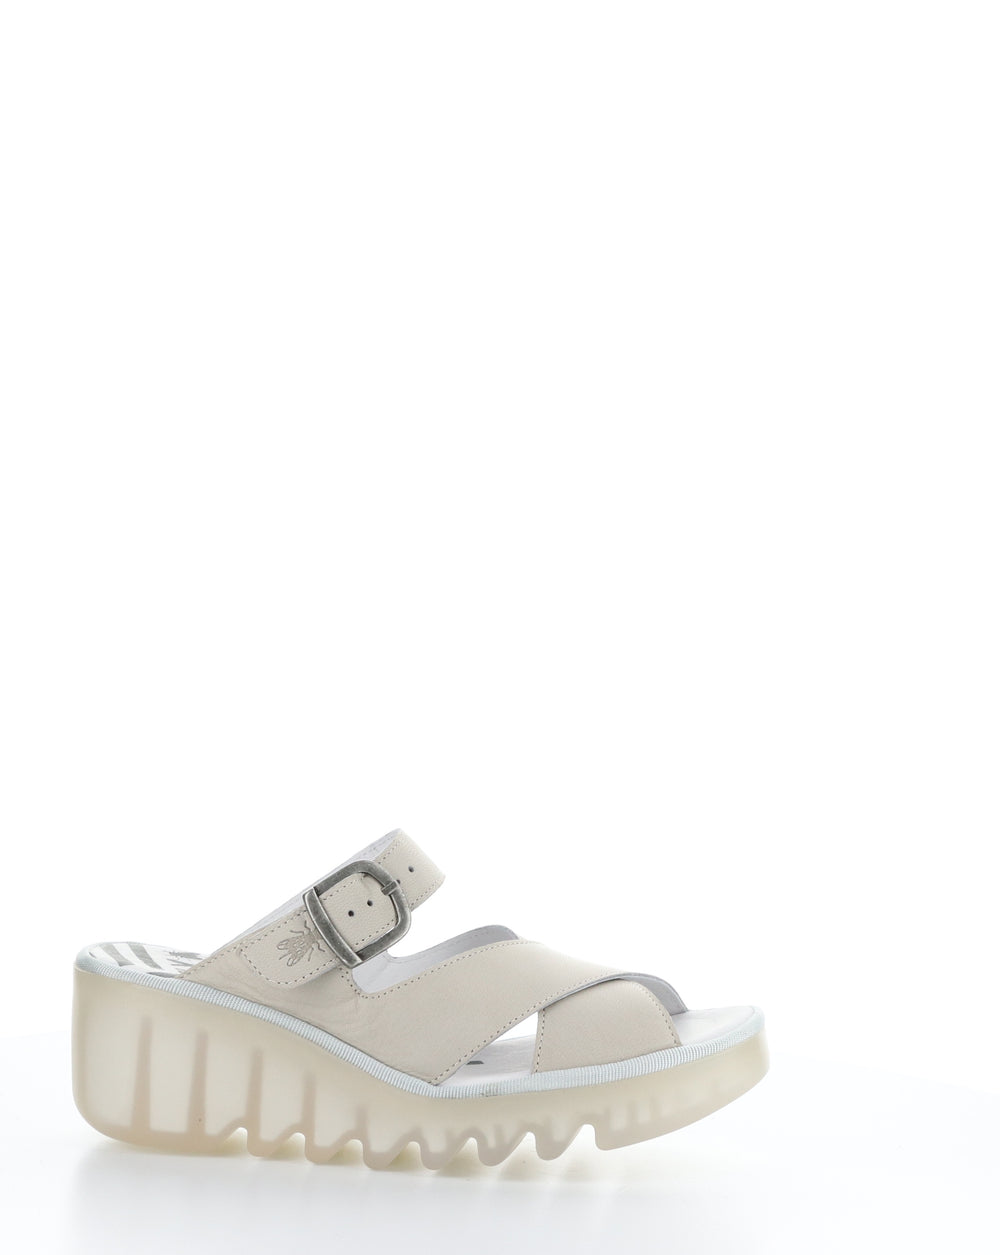 BOCY409FLY 001 CLOUD Slip-on Sandals